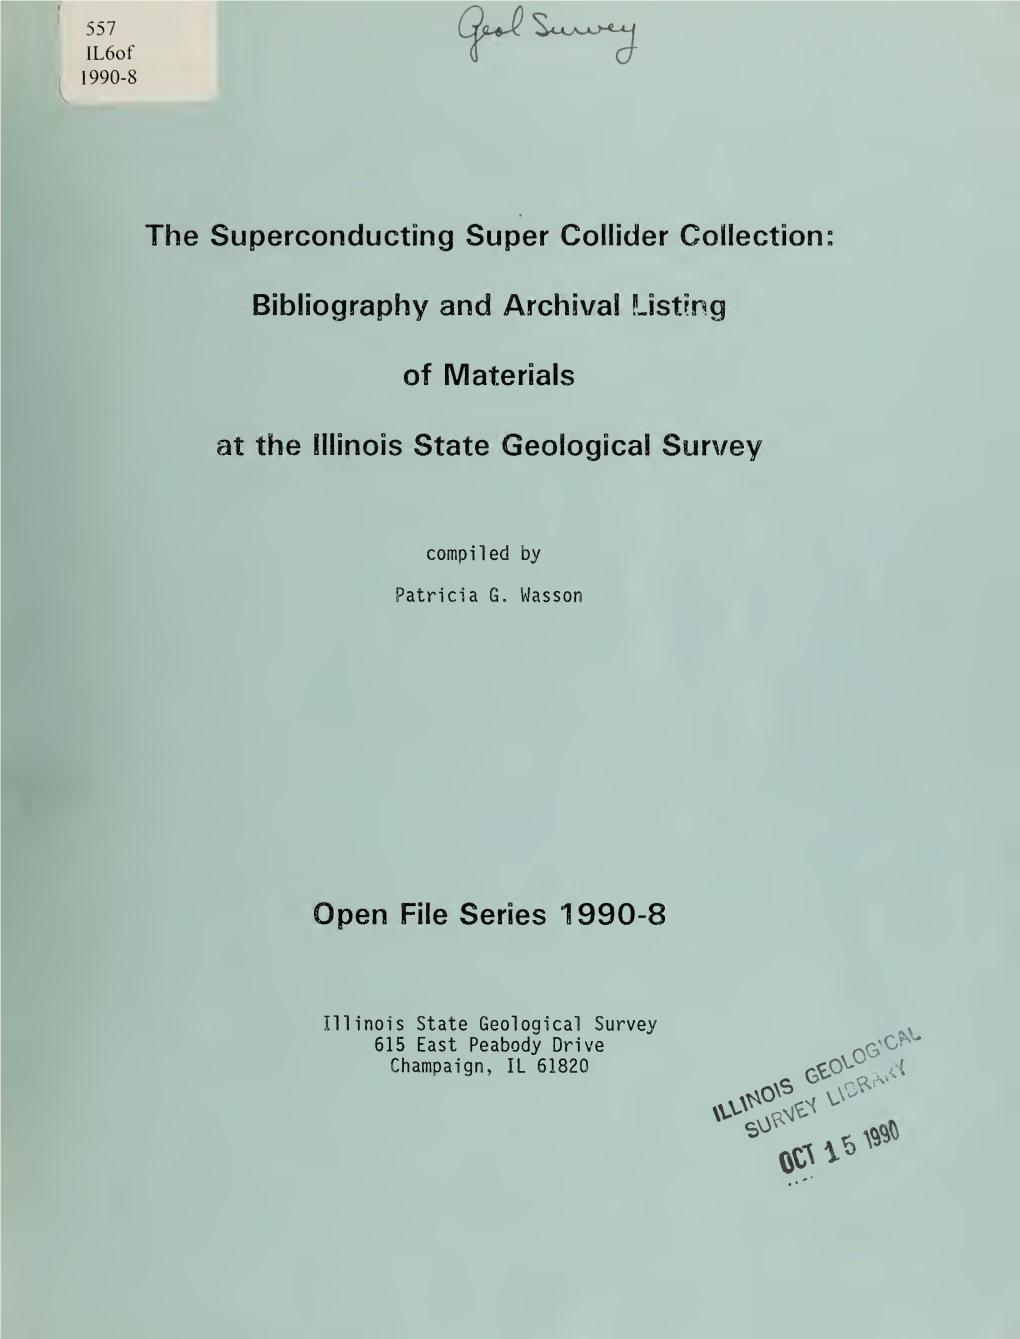 The Superconducting Super Collider Collection